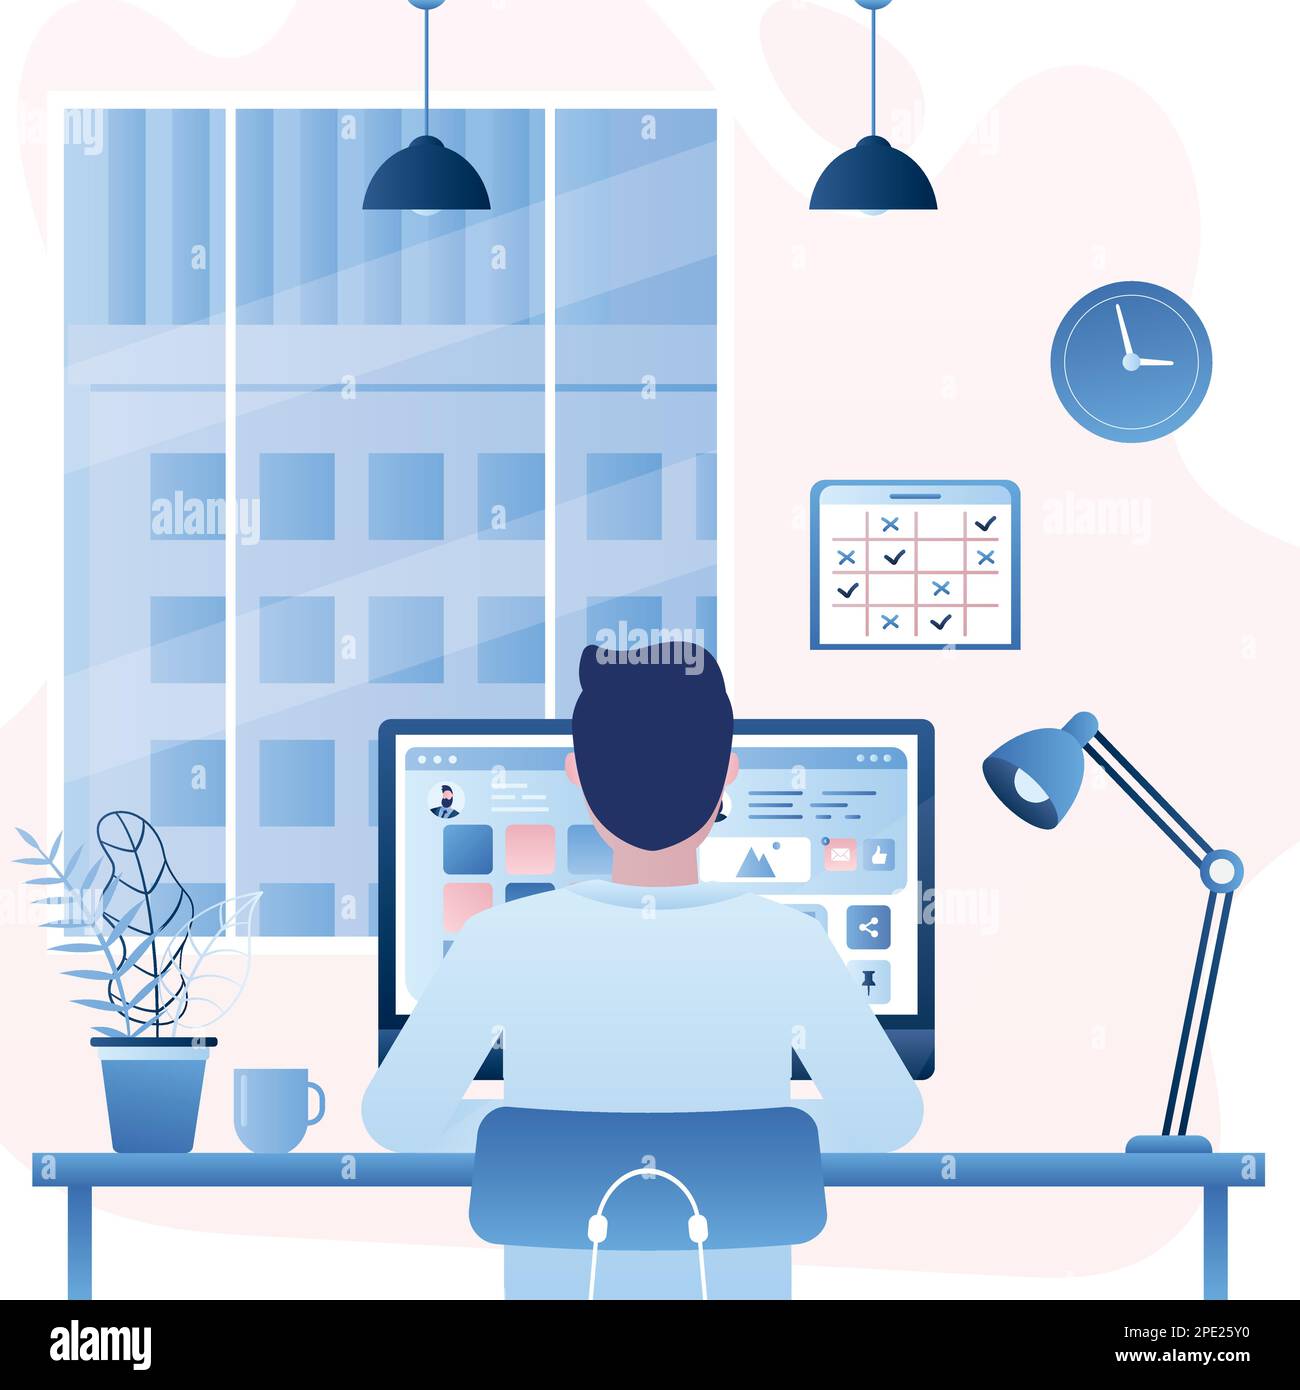 Man back view sits in front of the monitor screen. Social network chatting and work process. Office day concept background. Office room interior with Stock Vector